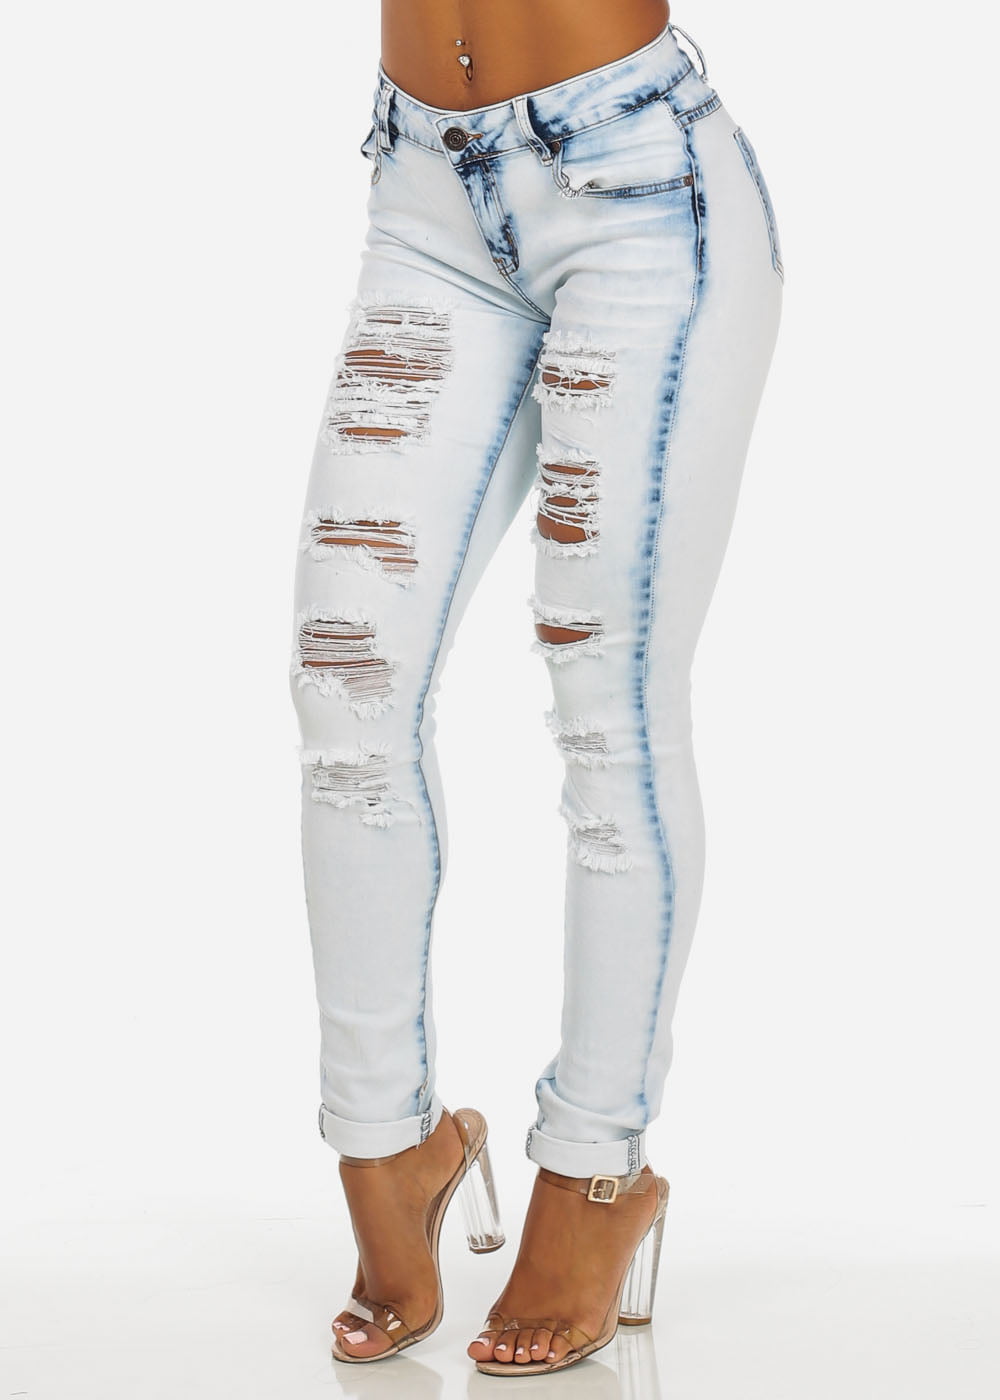 Modaxpressonline Womens Juniors Stylish Low Rise Ripped Skinny Jeans